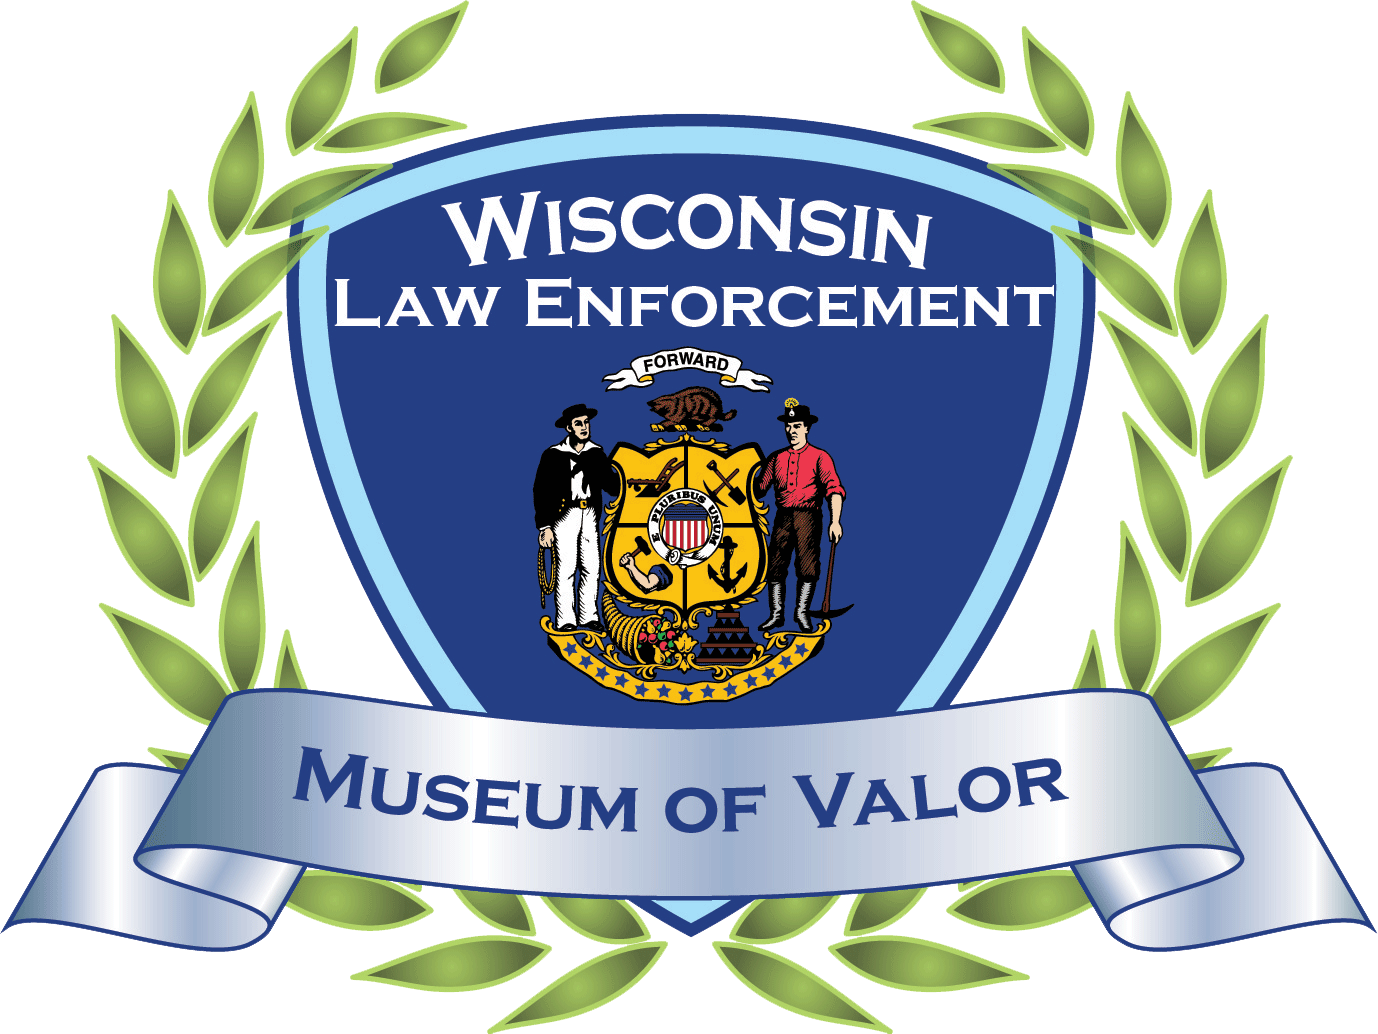 The Wisconsin Law Enforcement Museum of Valor